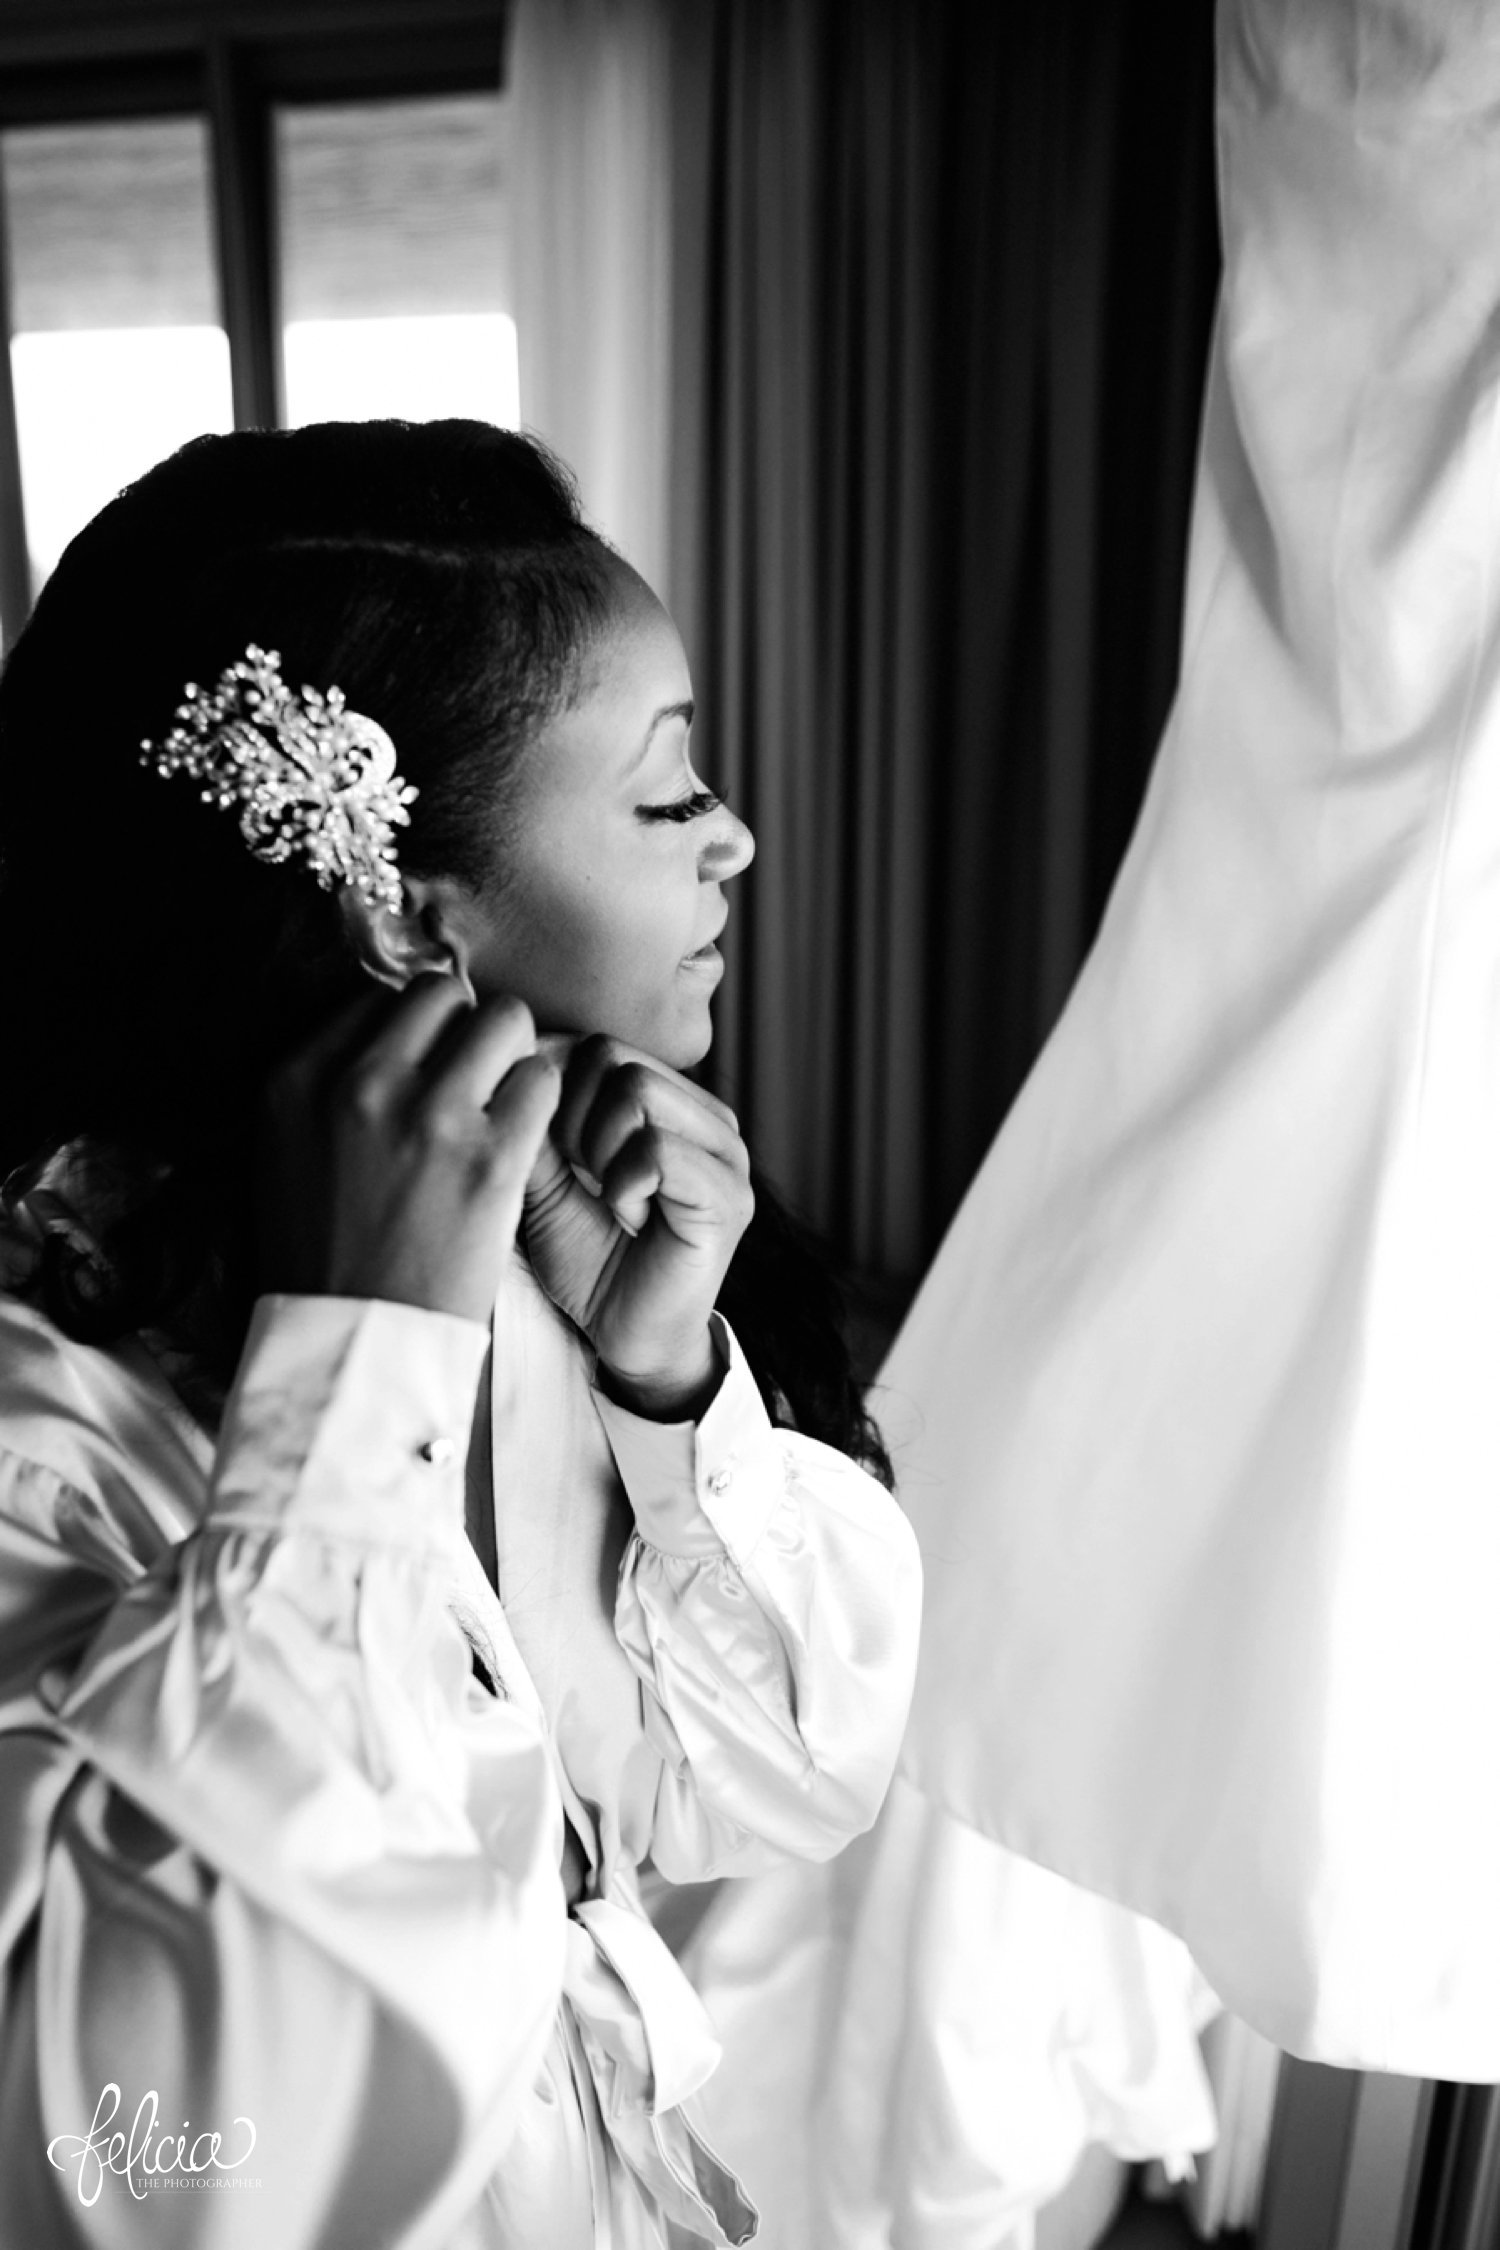   images by feliciathephotographer.com | destination wedding photographer | st lucia | l&s travel | the Royalton | getting ready | details | black and white | earrings | diamond hairpiece | white shirt | 